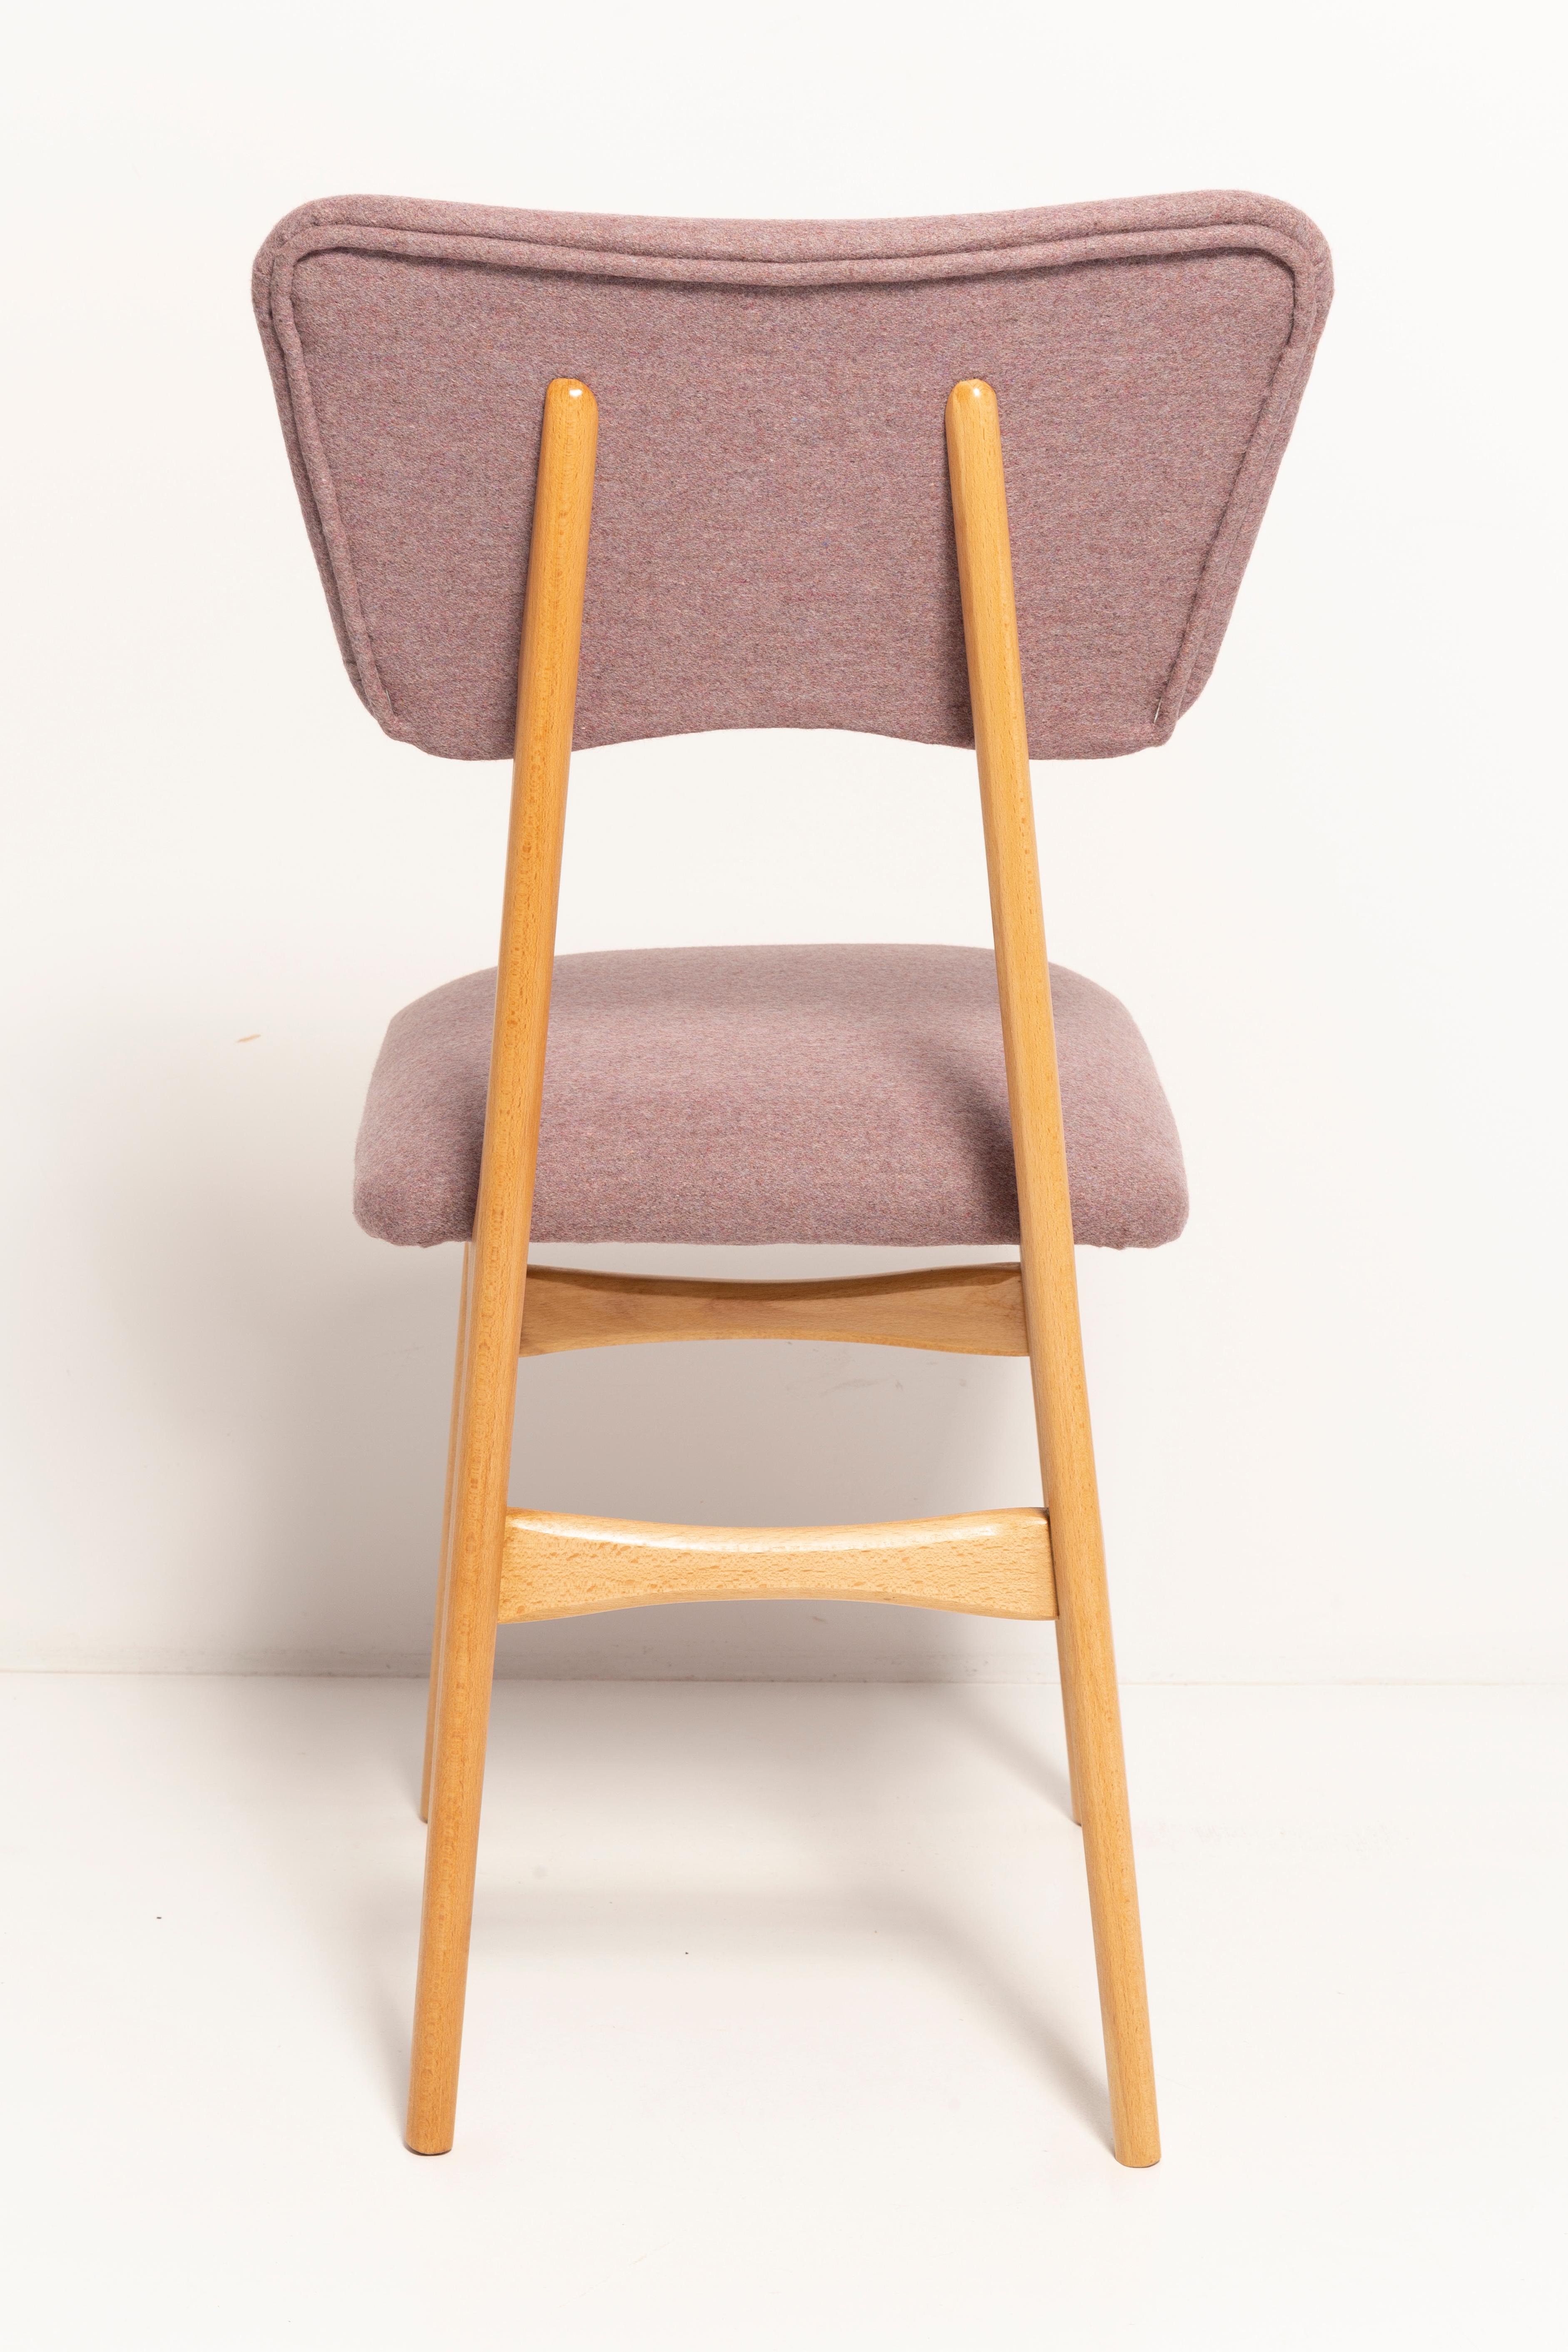 Five 20th Century Butterfly Dining Chairs, Pink Wool, Light Wood, Europe, 1960s For Sale 1